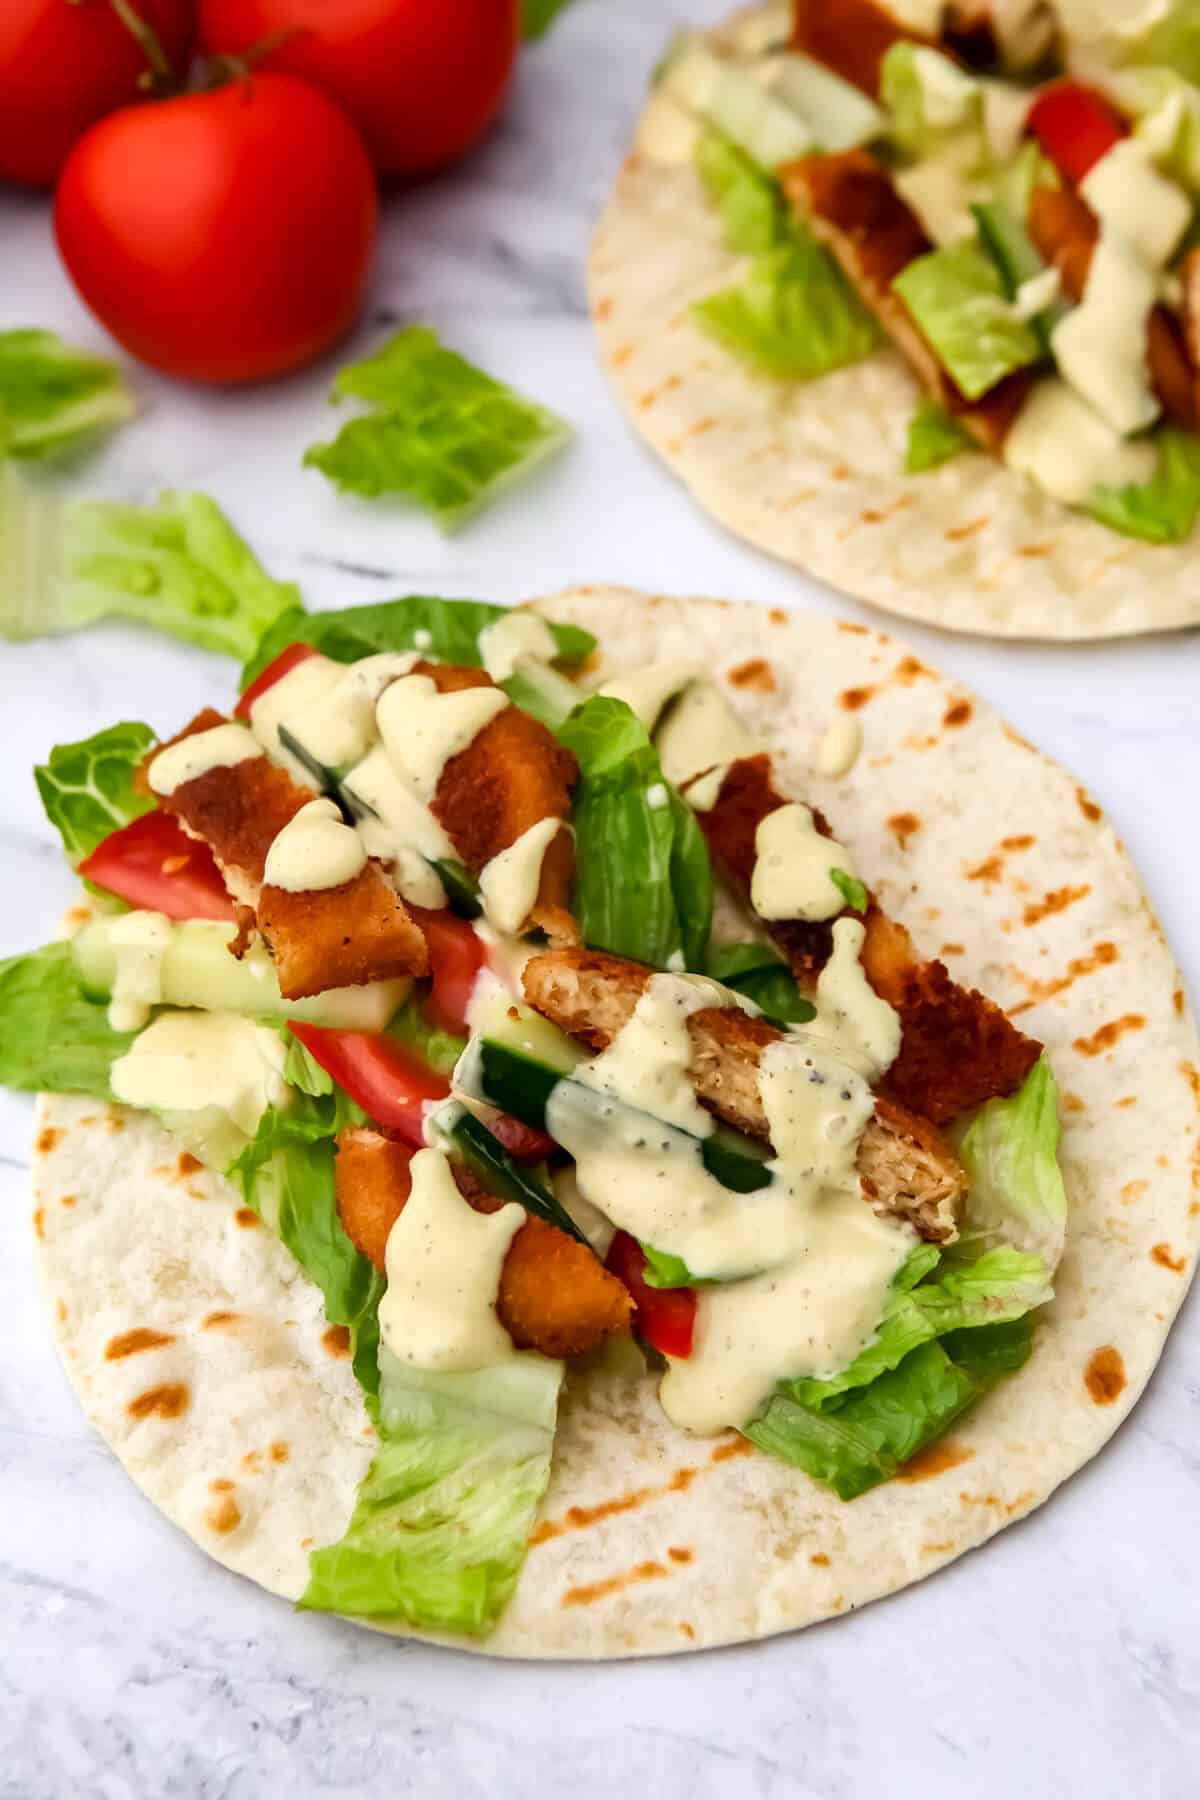 Vegan chicken wrap ingredients on a tortilla before wrapping it up.